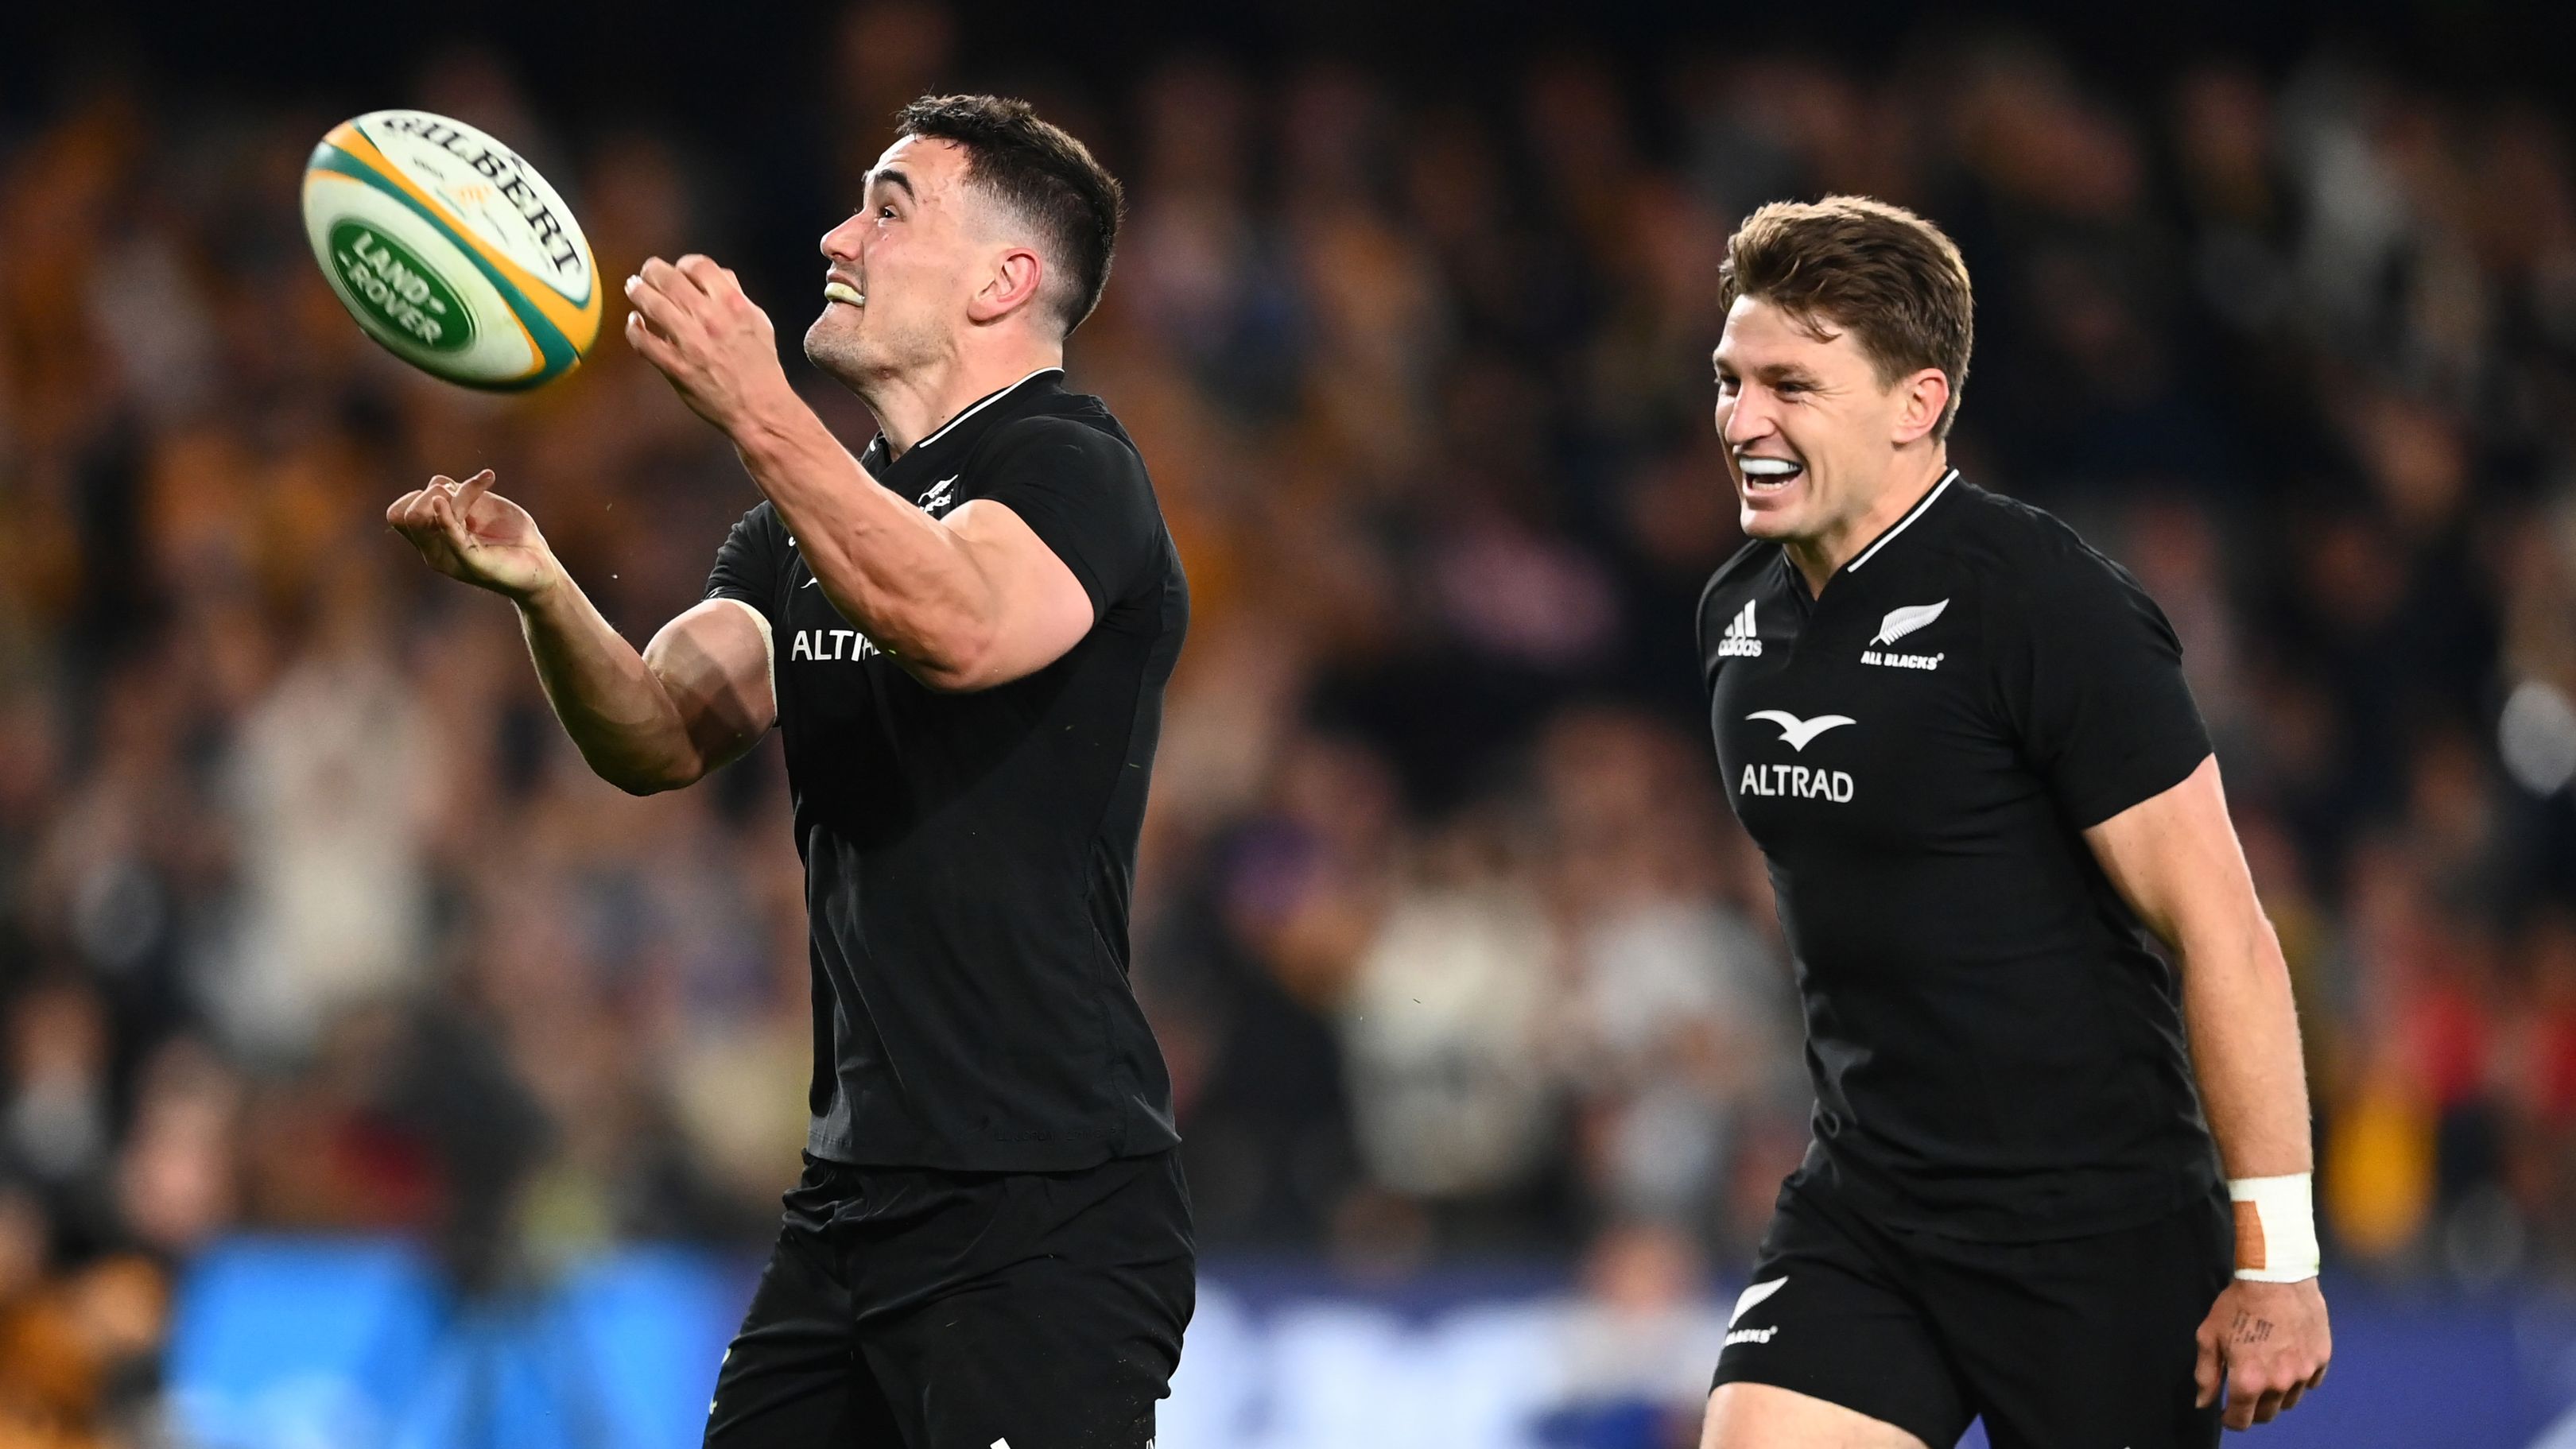 Will Jordan of the All Blacks celebrates after scoring a try with Beauden Barrett.